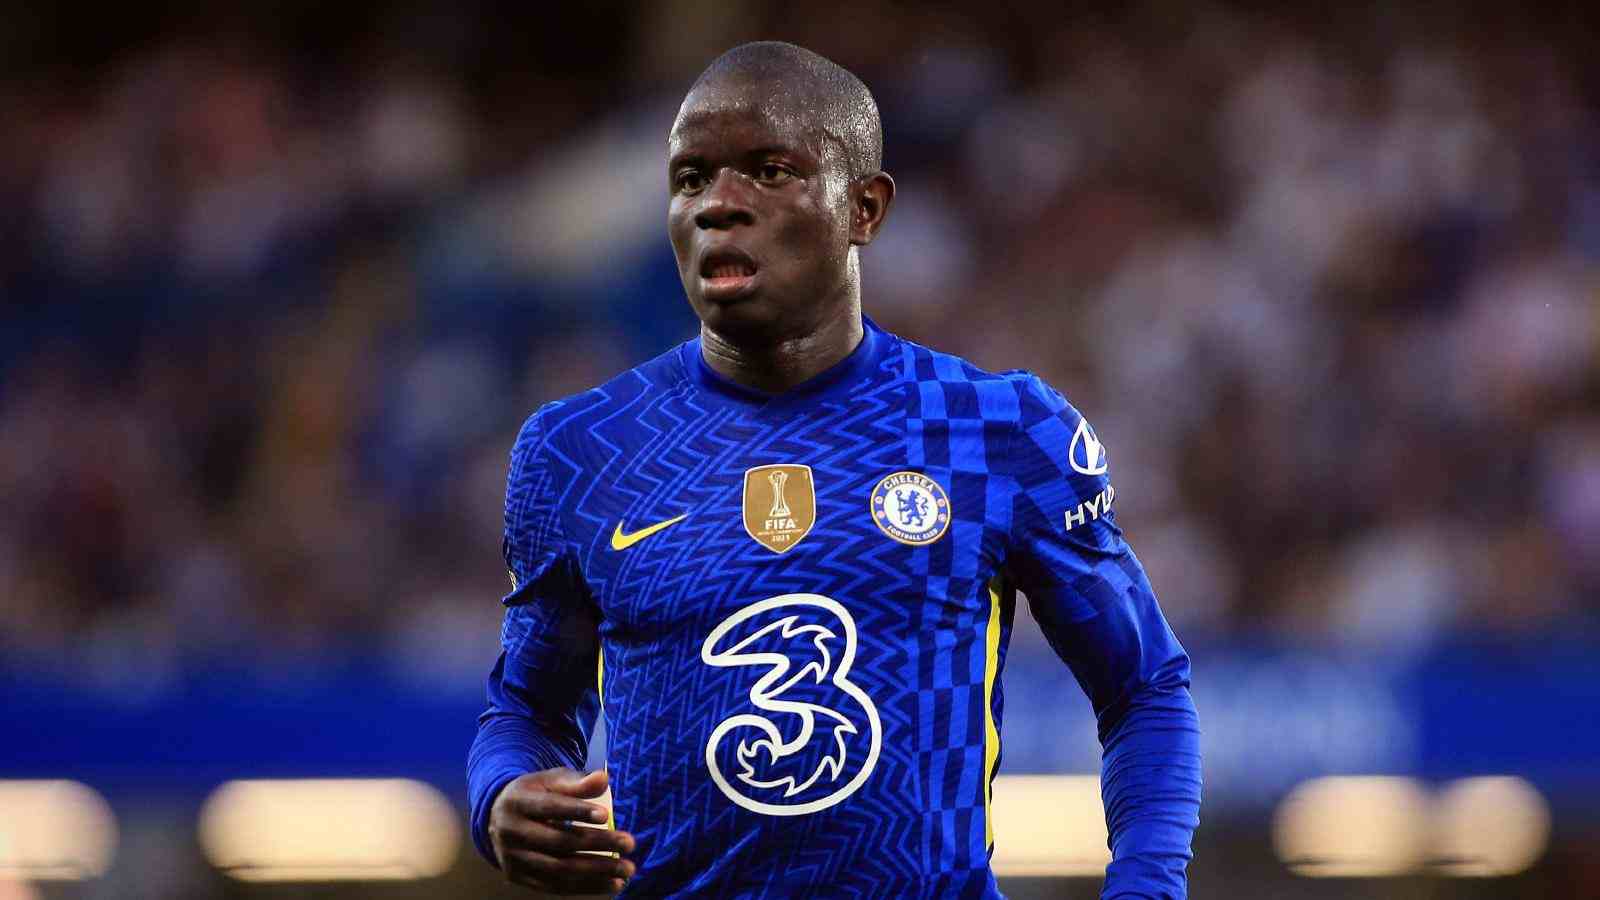 Al-Ittihad Gives Update Regarding The Signing Of N'Golo Kante - All Thet You Need To Know